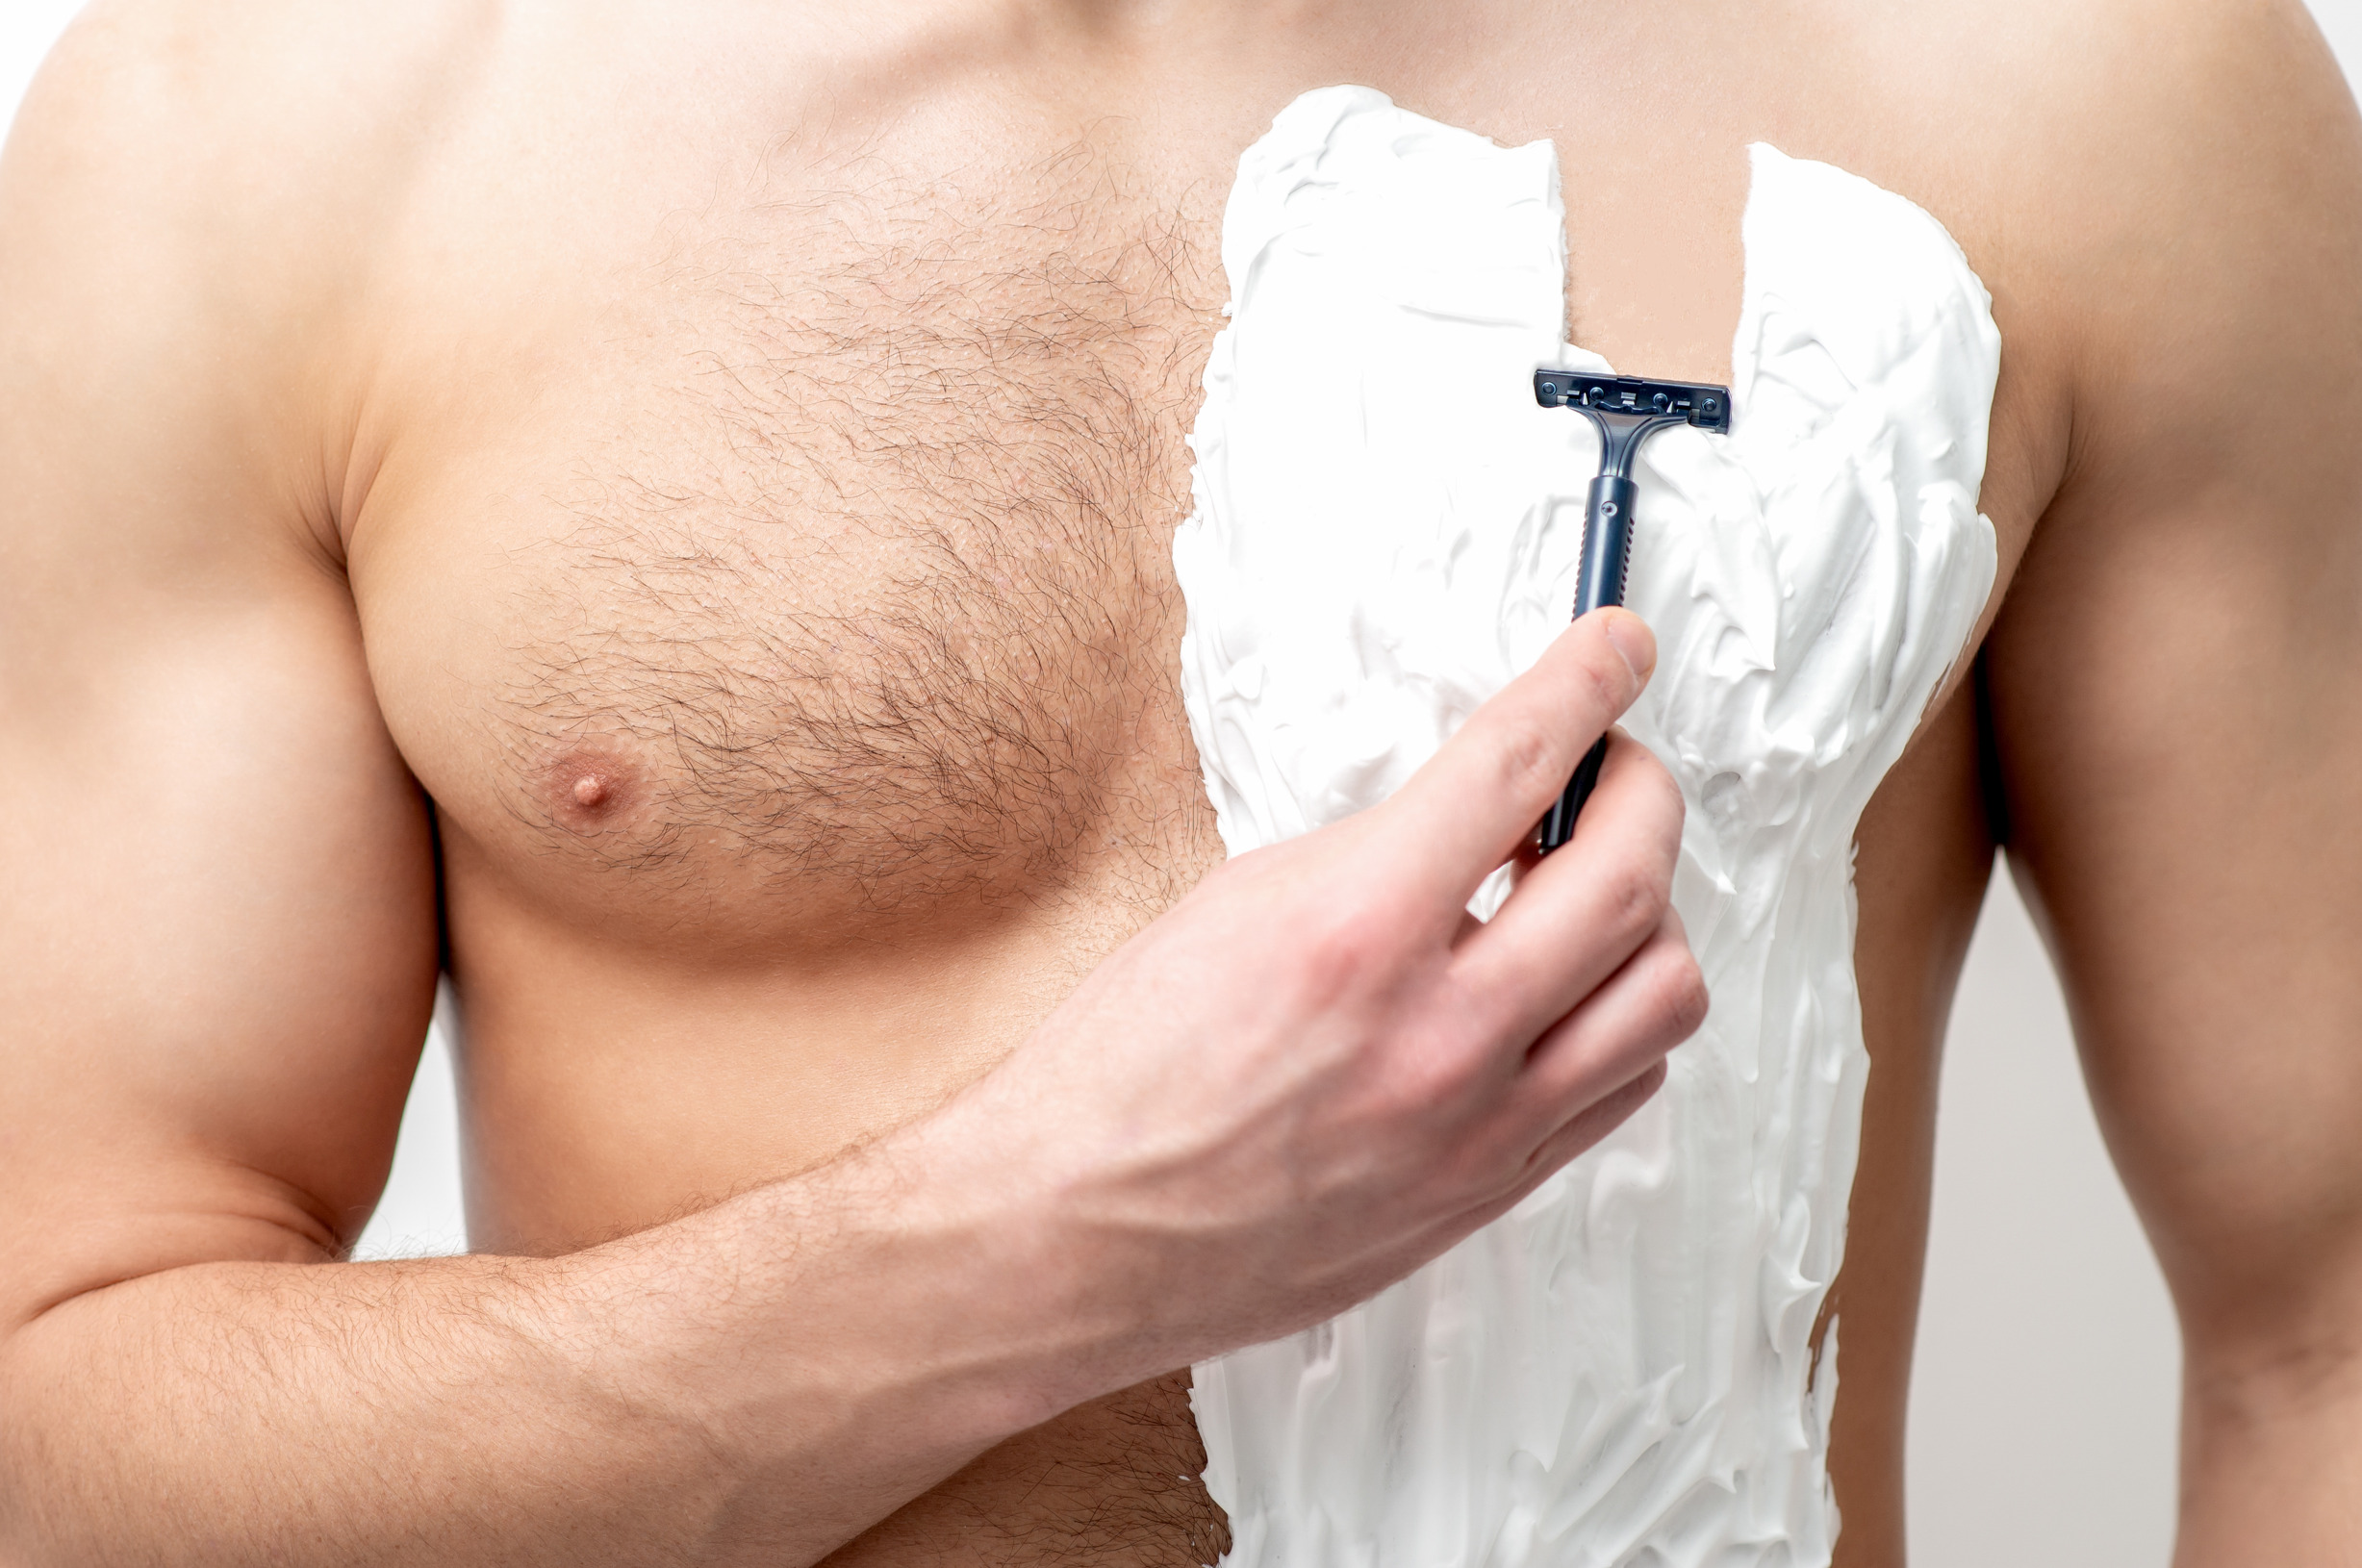 Female Chest Hair: Remove Hair with IPL – Kenzzi